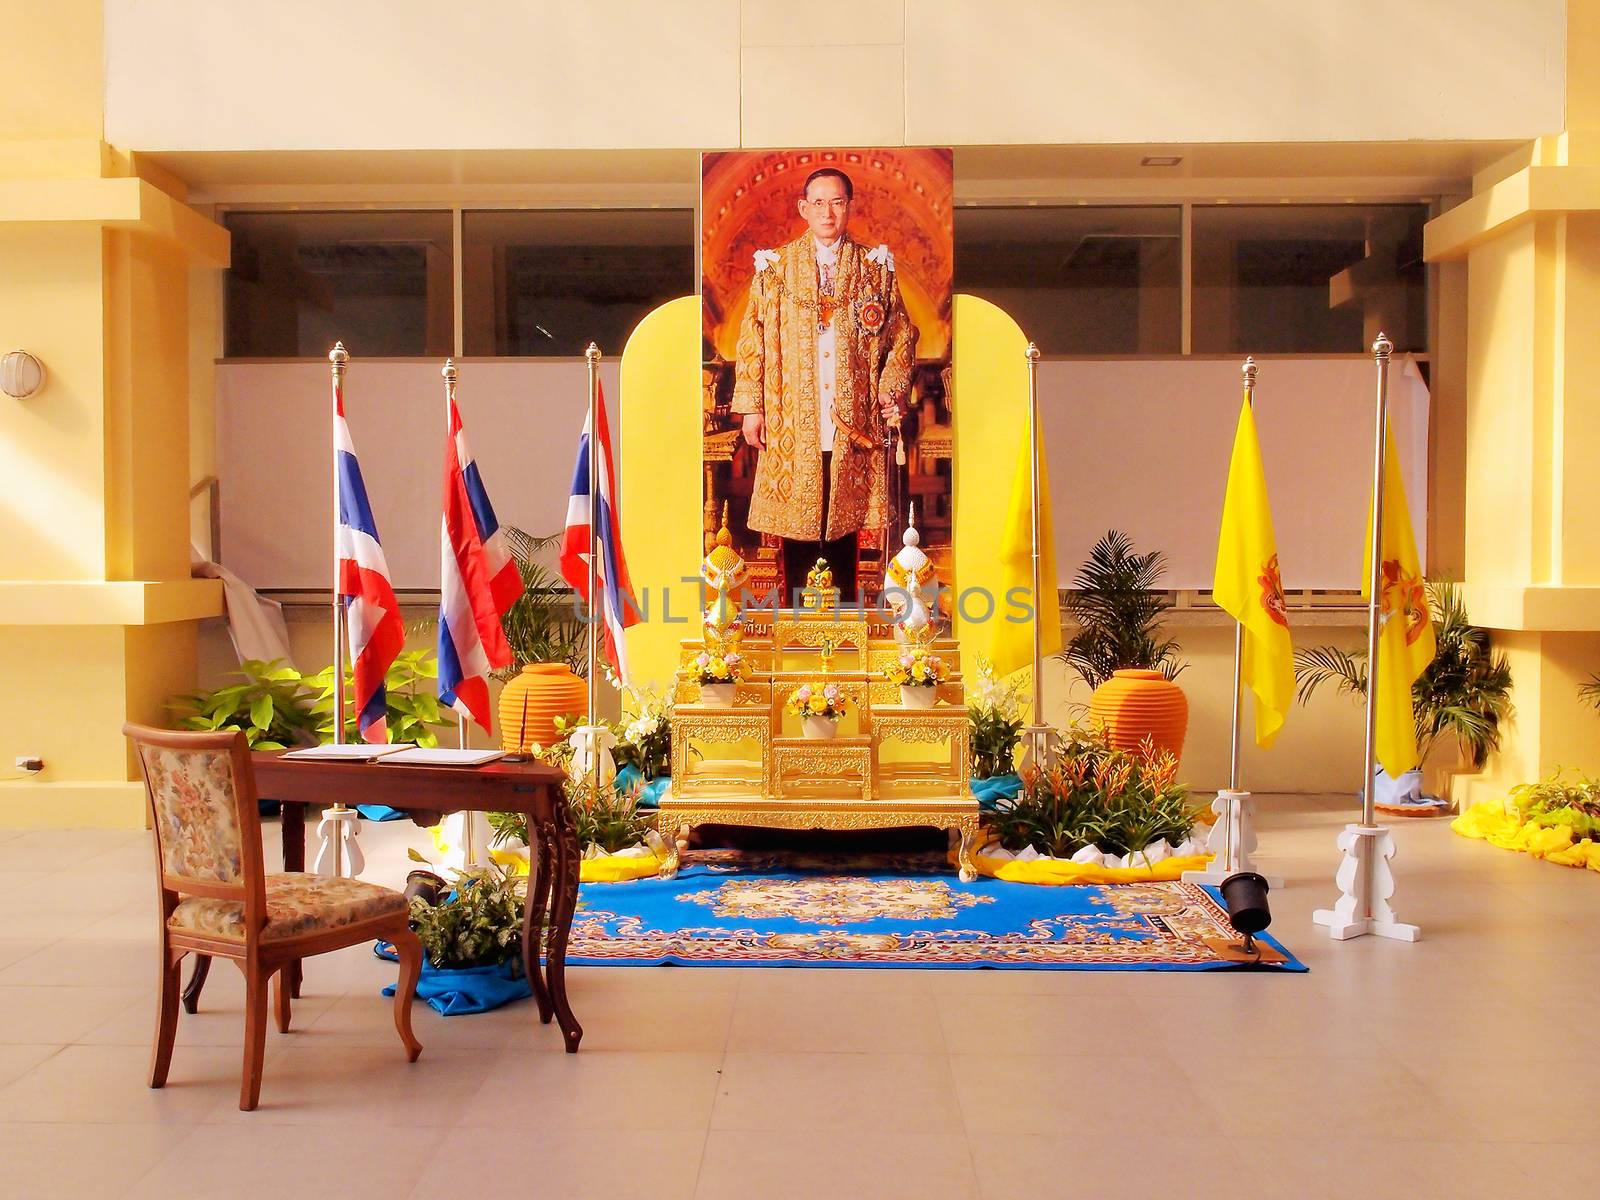 BANGKOK - DECEMBER 20 :Decoration picture of King and table for Thai people sign get-well messages for HM King Bhumibol Adulyadej at Central Chest Hospital on December 20, 2013 in Bangkok, Thailand.